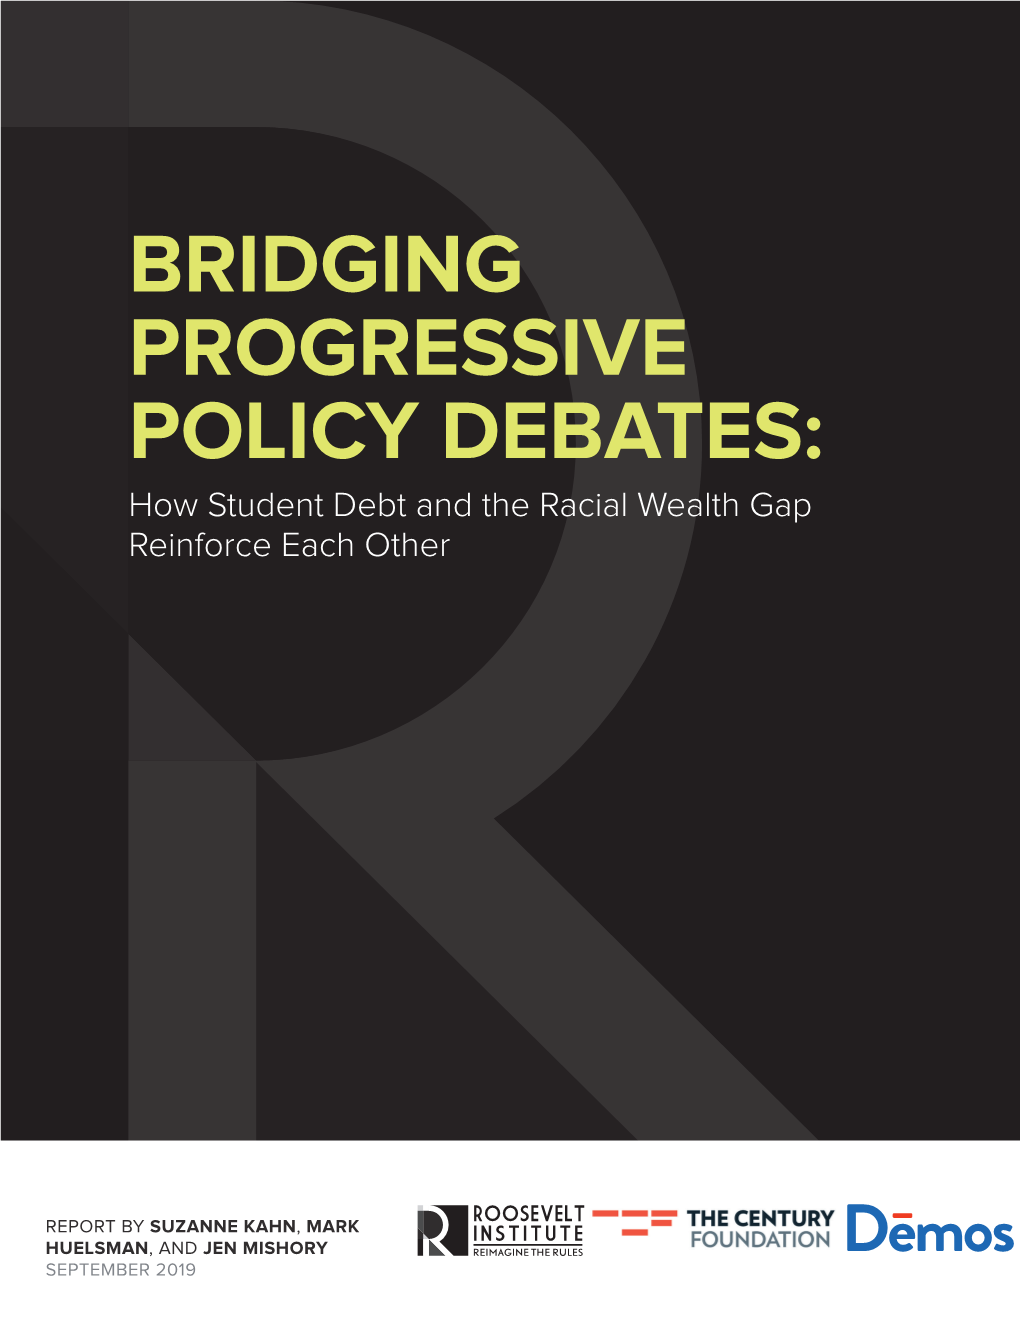 BRIDGING PROGRESSIVE POLICY DEBATES: How Student Debt and the Racial Wealth Gap Reinforce Each Other